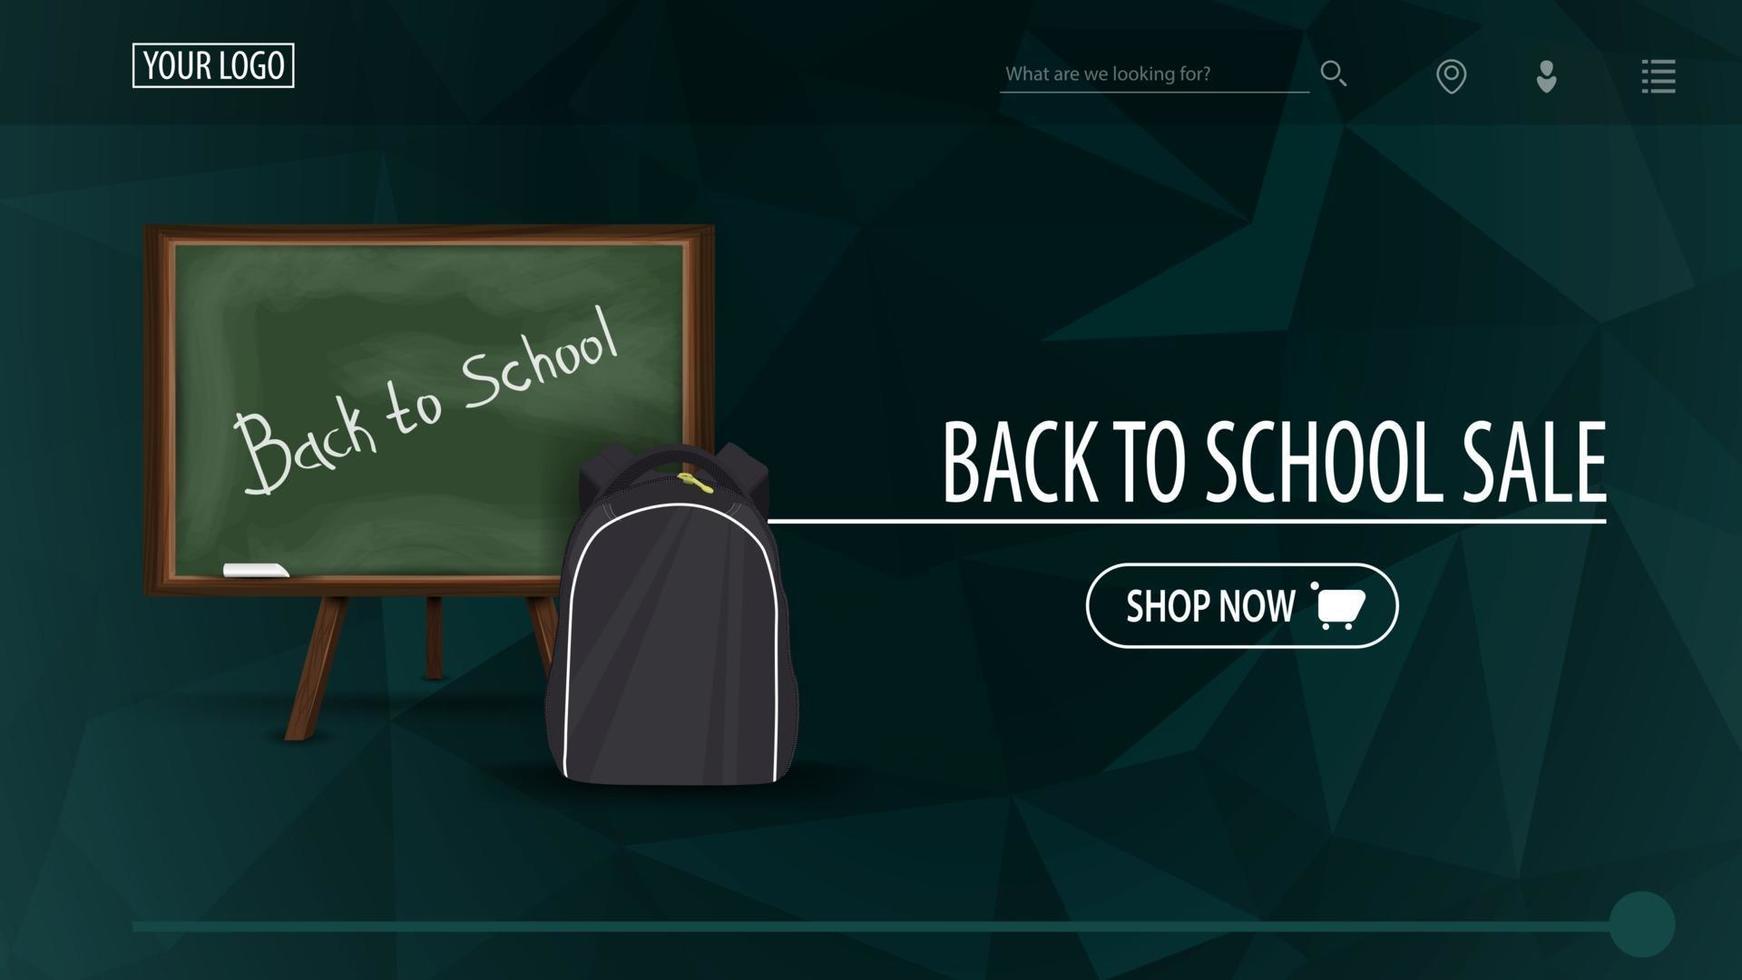 Back to school sale and discount week, green discount banner vector